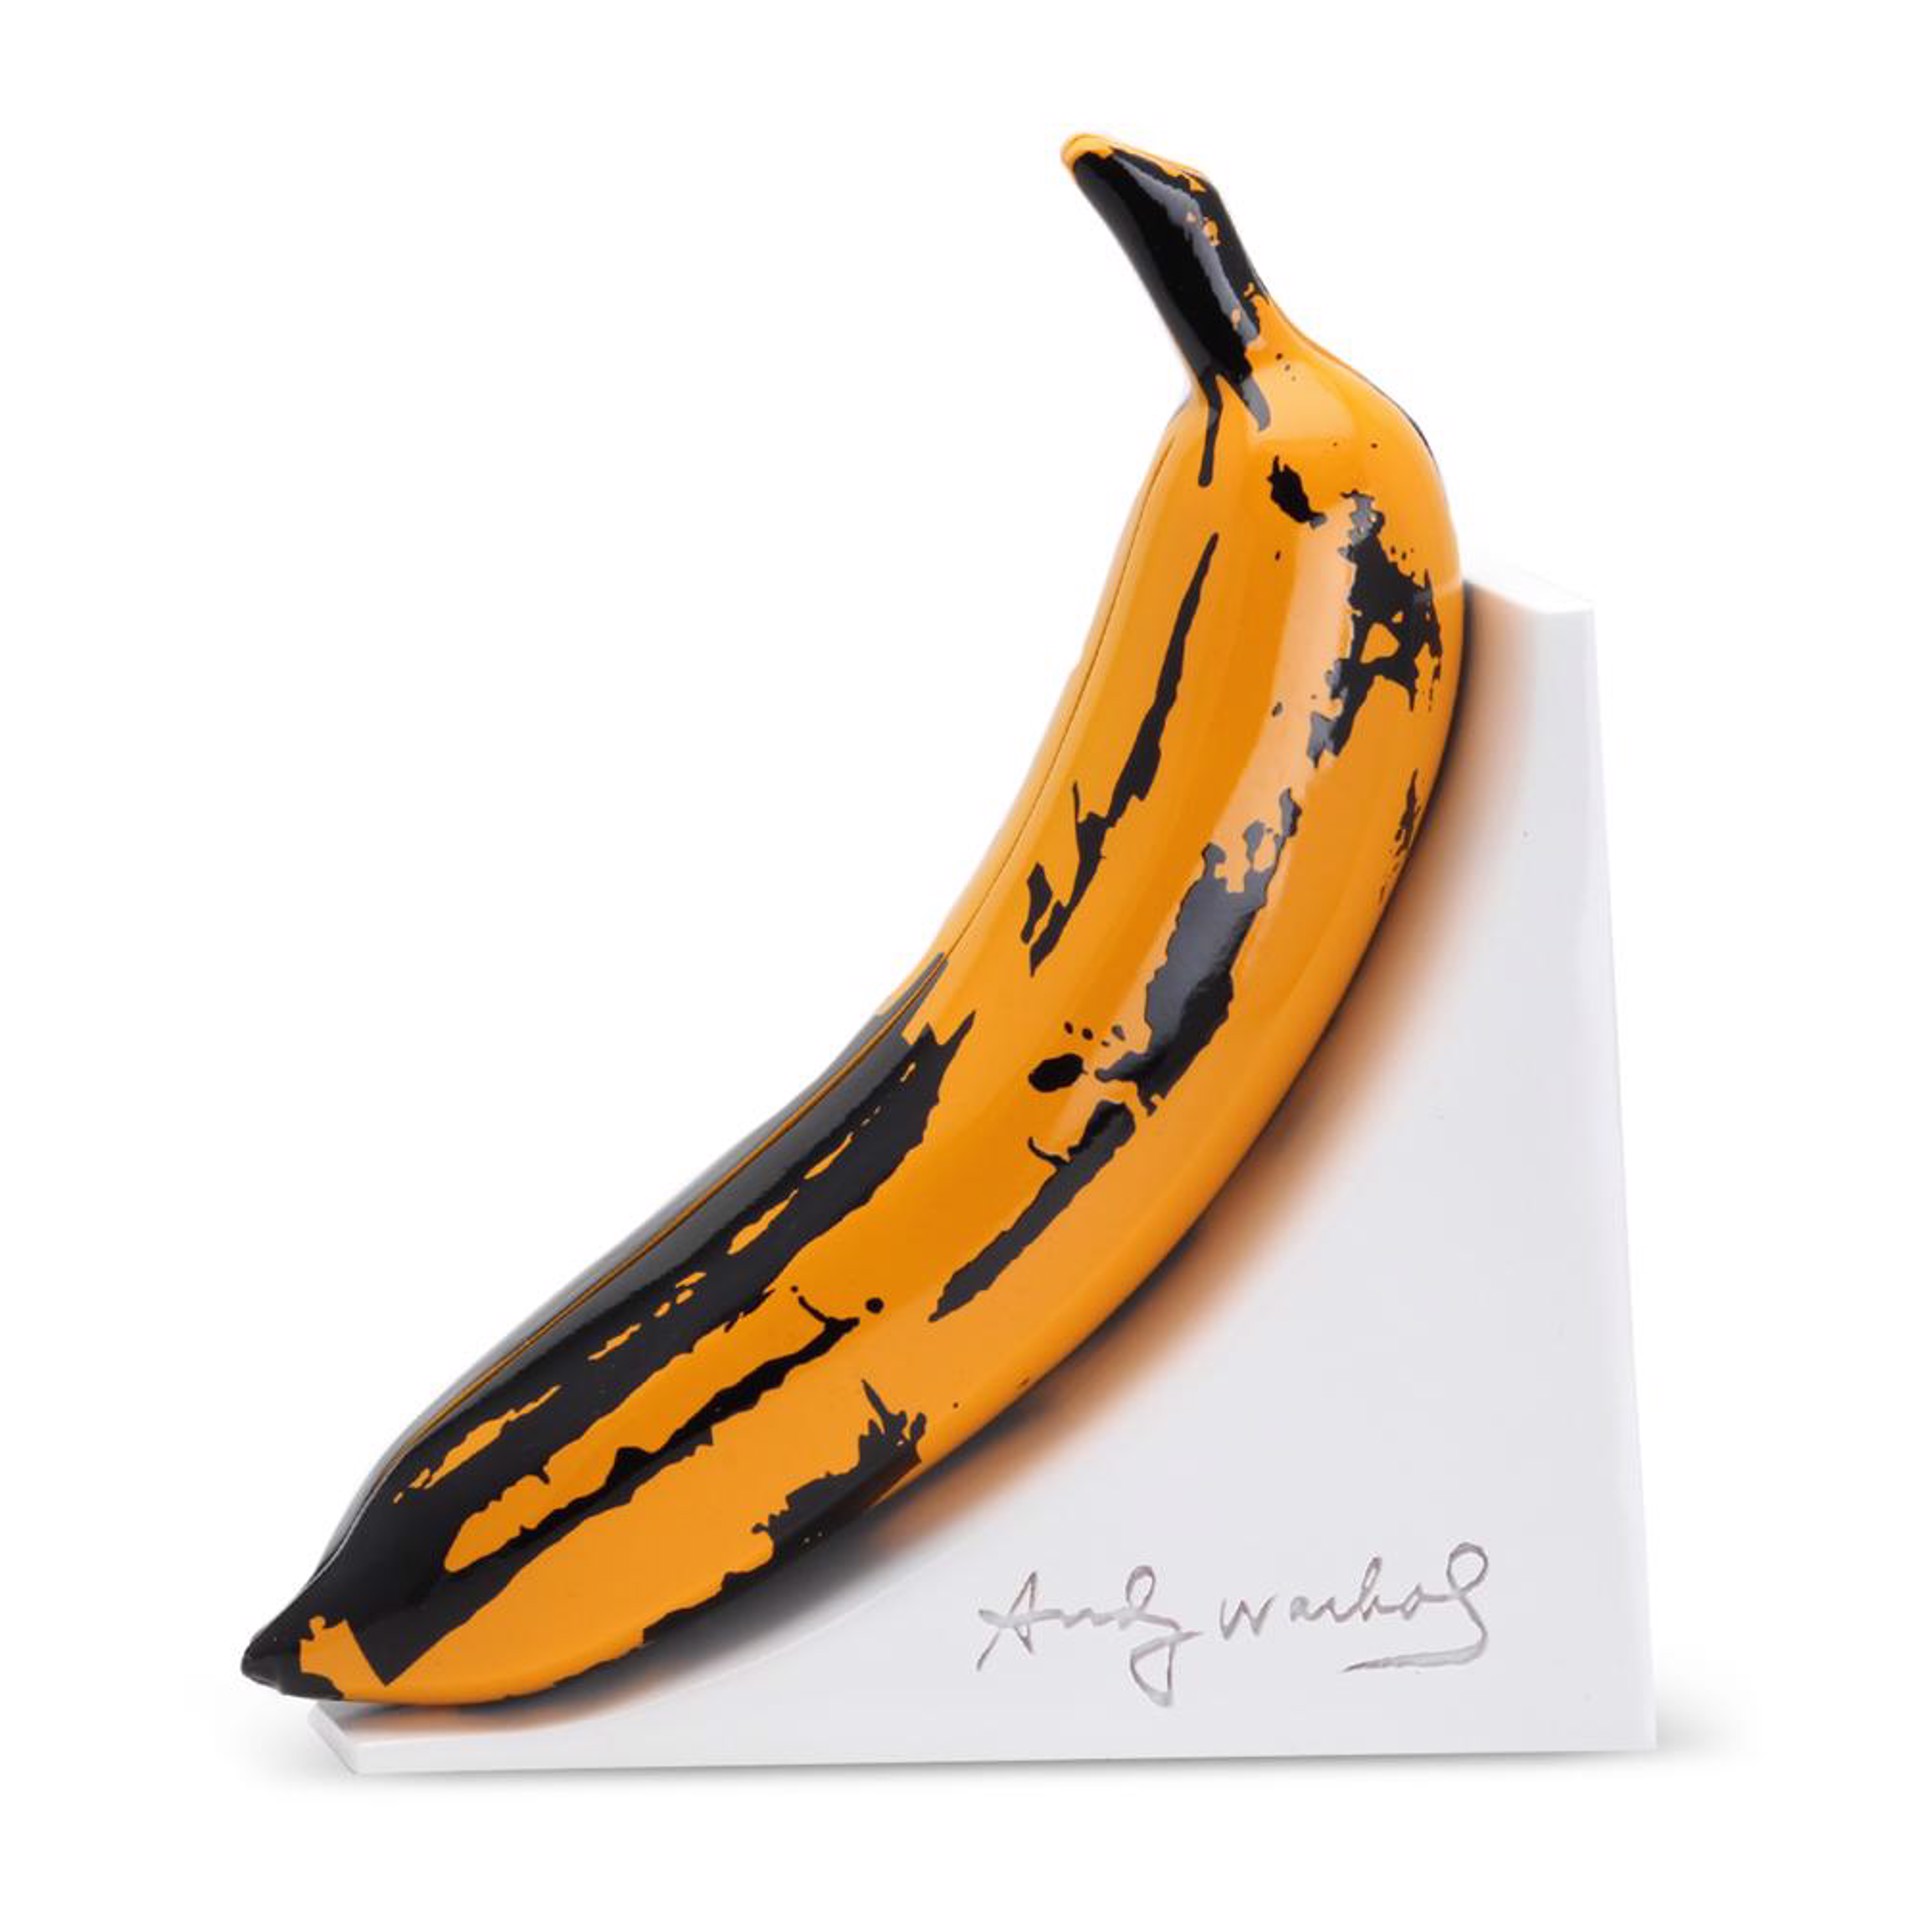 Andy Warhol Resin Banana Bookends by Andy Warhol